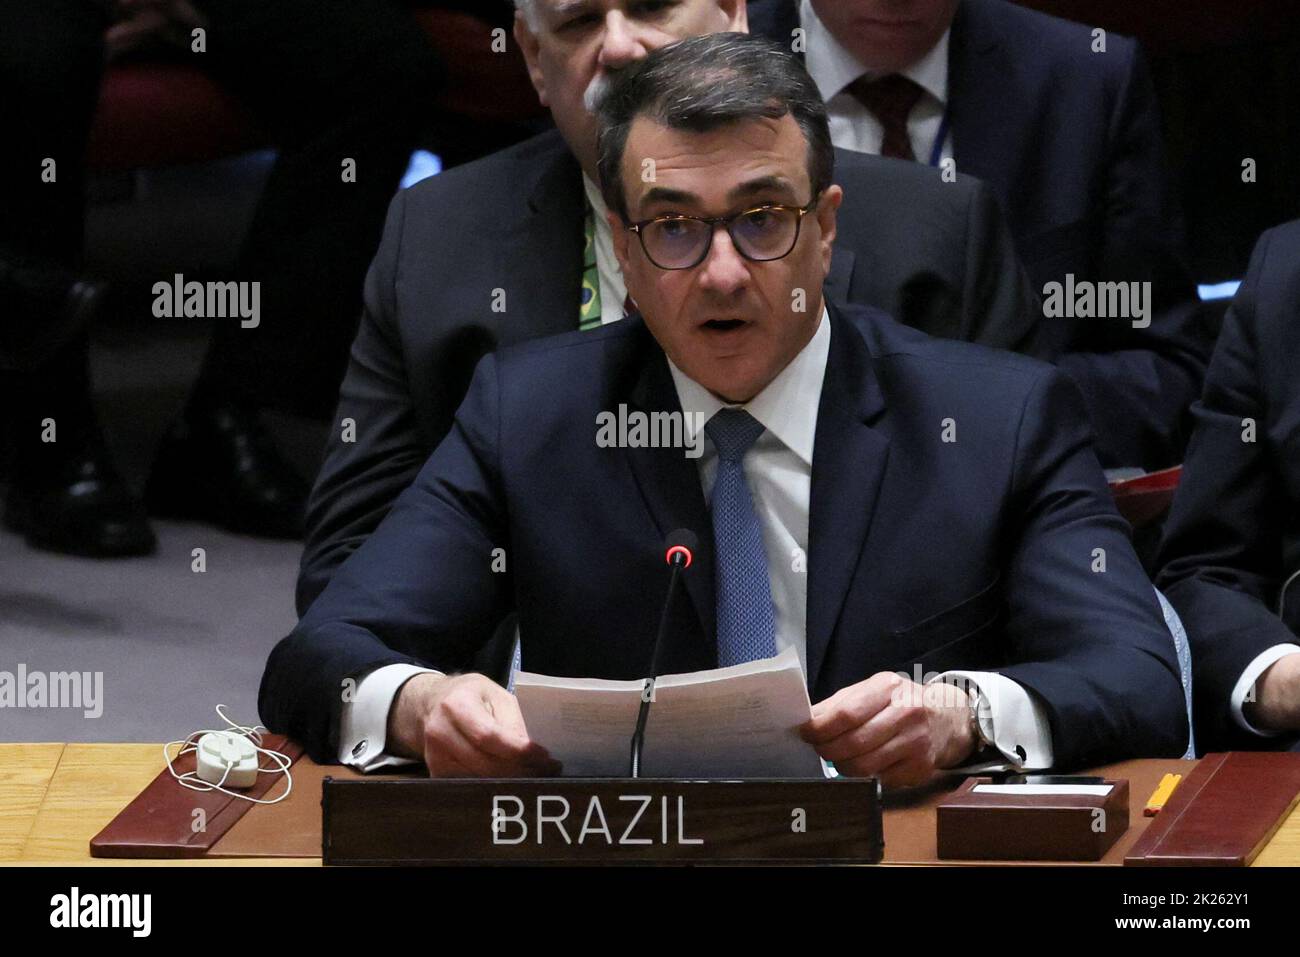 Brazil's Minister of Foreign Affairs Carlos Alberto Franco speaks during a high level meeting of the United Nations Security Council on the situation amid Russia's invasion of Ukraine, at the 77th Session of the United Nations General Assembly at U.N. Headquarters in New York City, U.S., September 22, 2022. REUTERS/Brendan McDermid Stock Photo